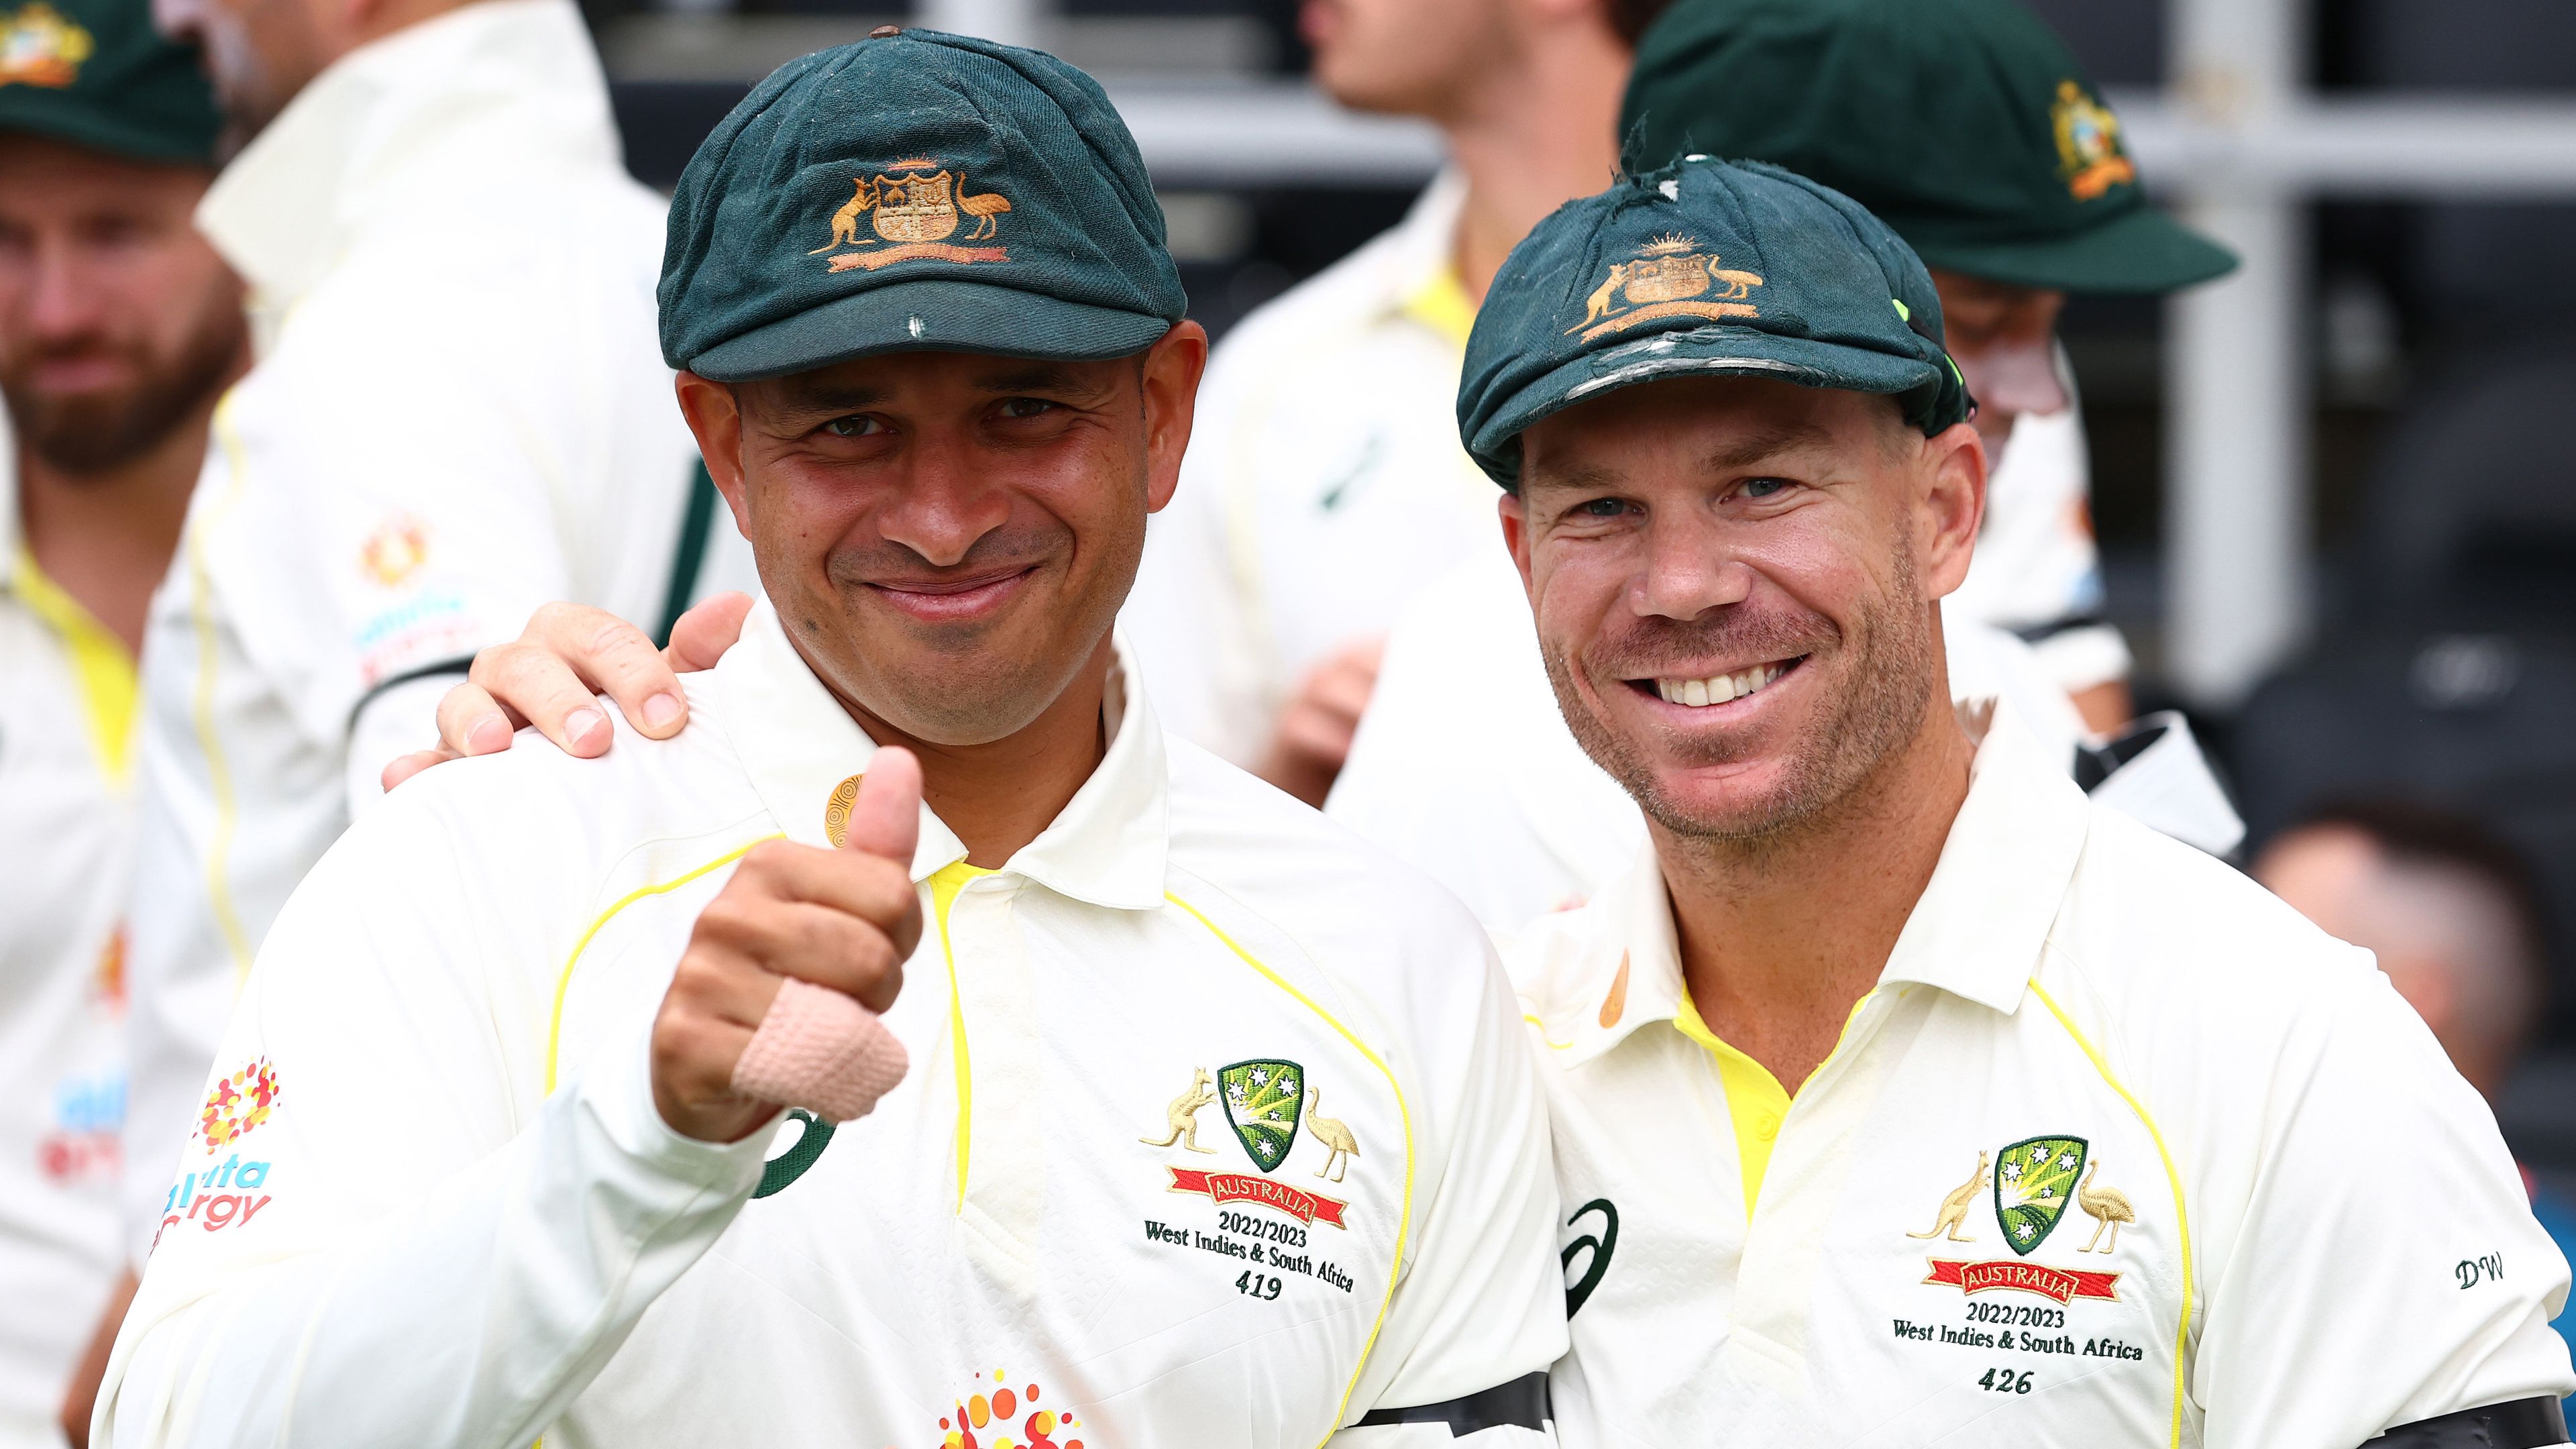 David Warner and Usman Khawaja of Australia talk ahead of day one of the First Test match between Australia and South Africa at The Gabba on December 17, 2022 in Brisbane, Australia. (Photo by Chris Hyde - CA/Cricket Australia via Getty Images)